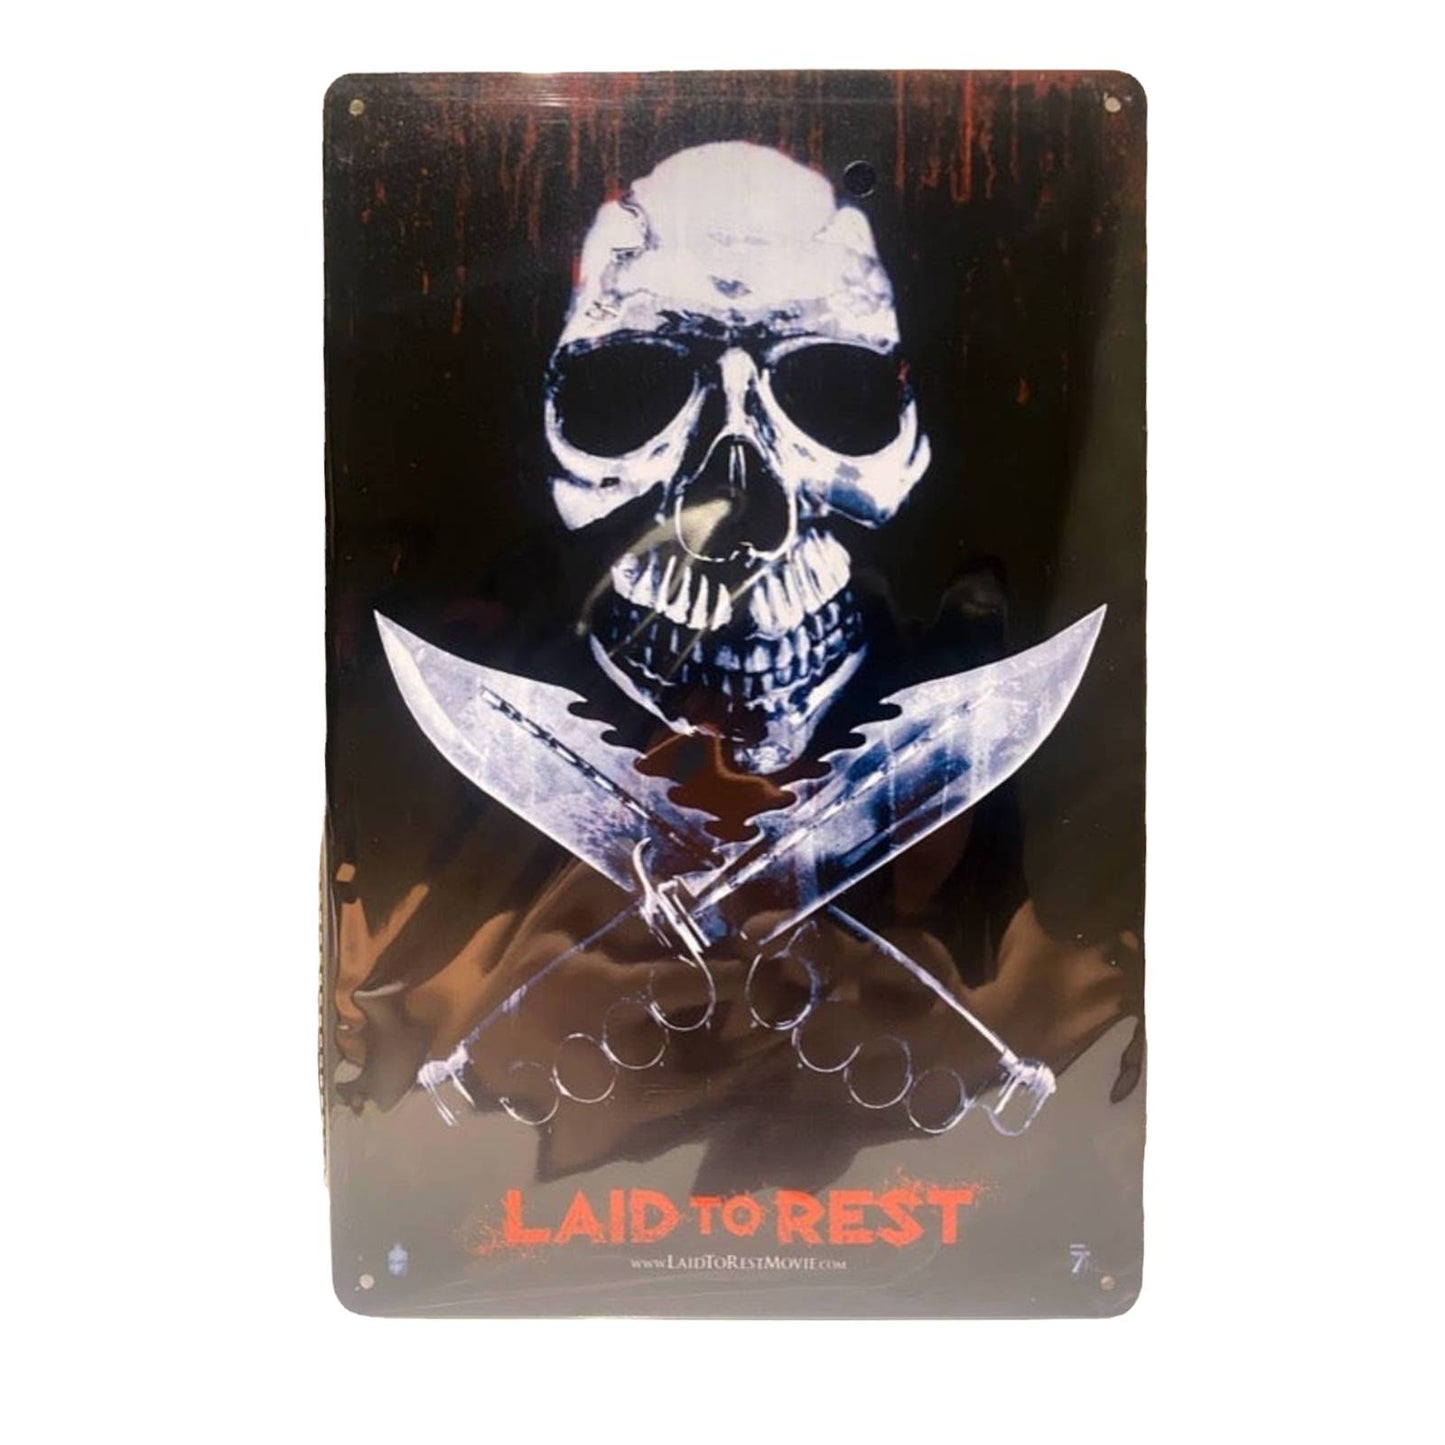 Laid To Rest Movie Poster Metal Tin Sign 8"x12"